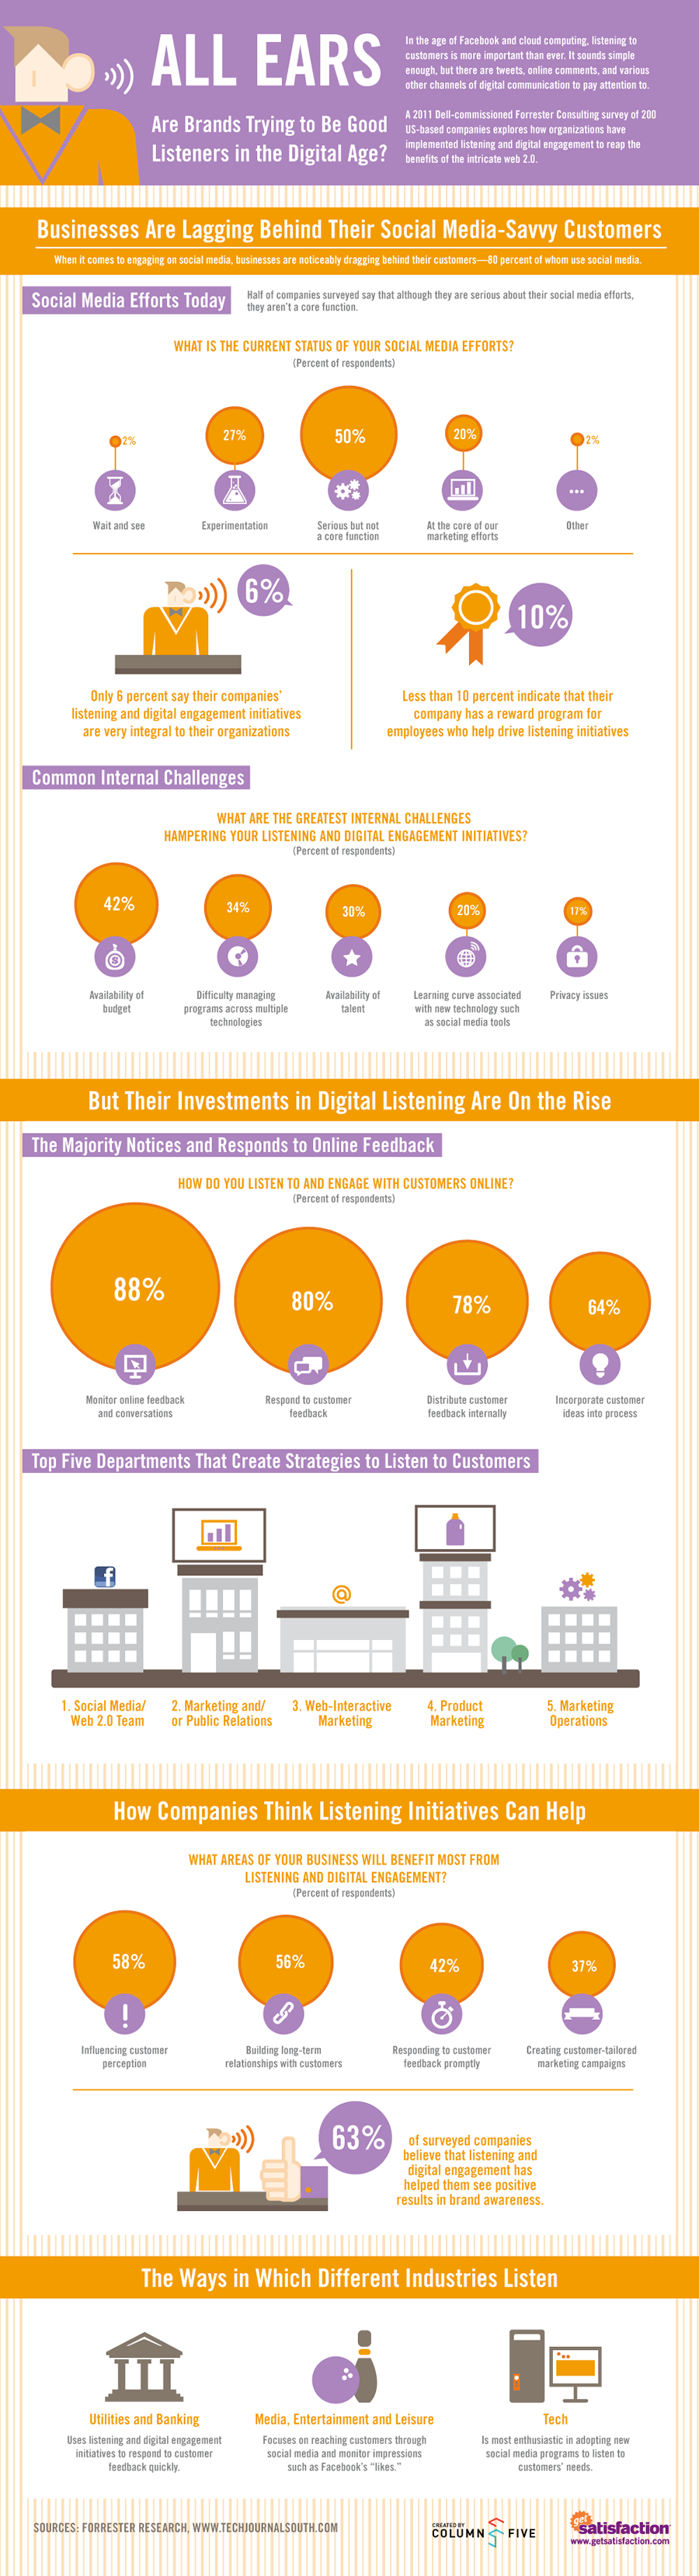 http://inblurbs.com/wp-content/uploads/2012/08/How_Brands_Can_Listen_in_the_Digital_Age-full1.png